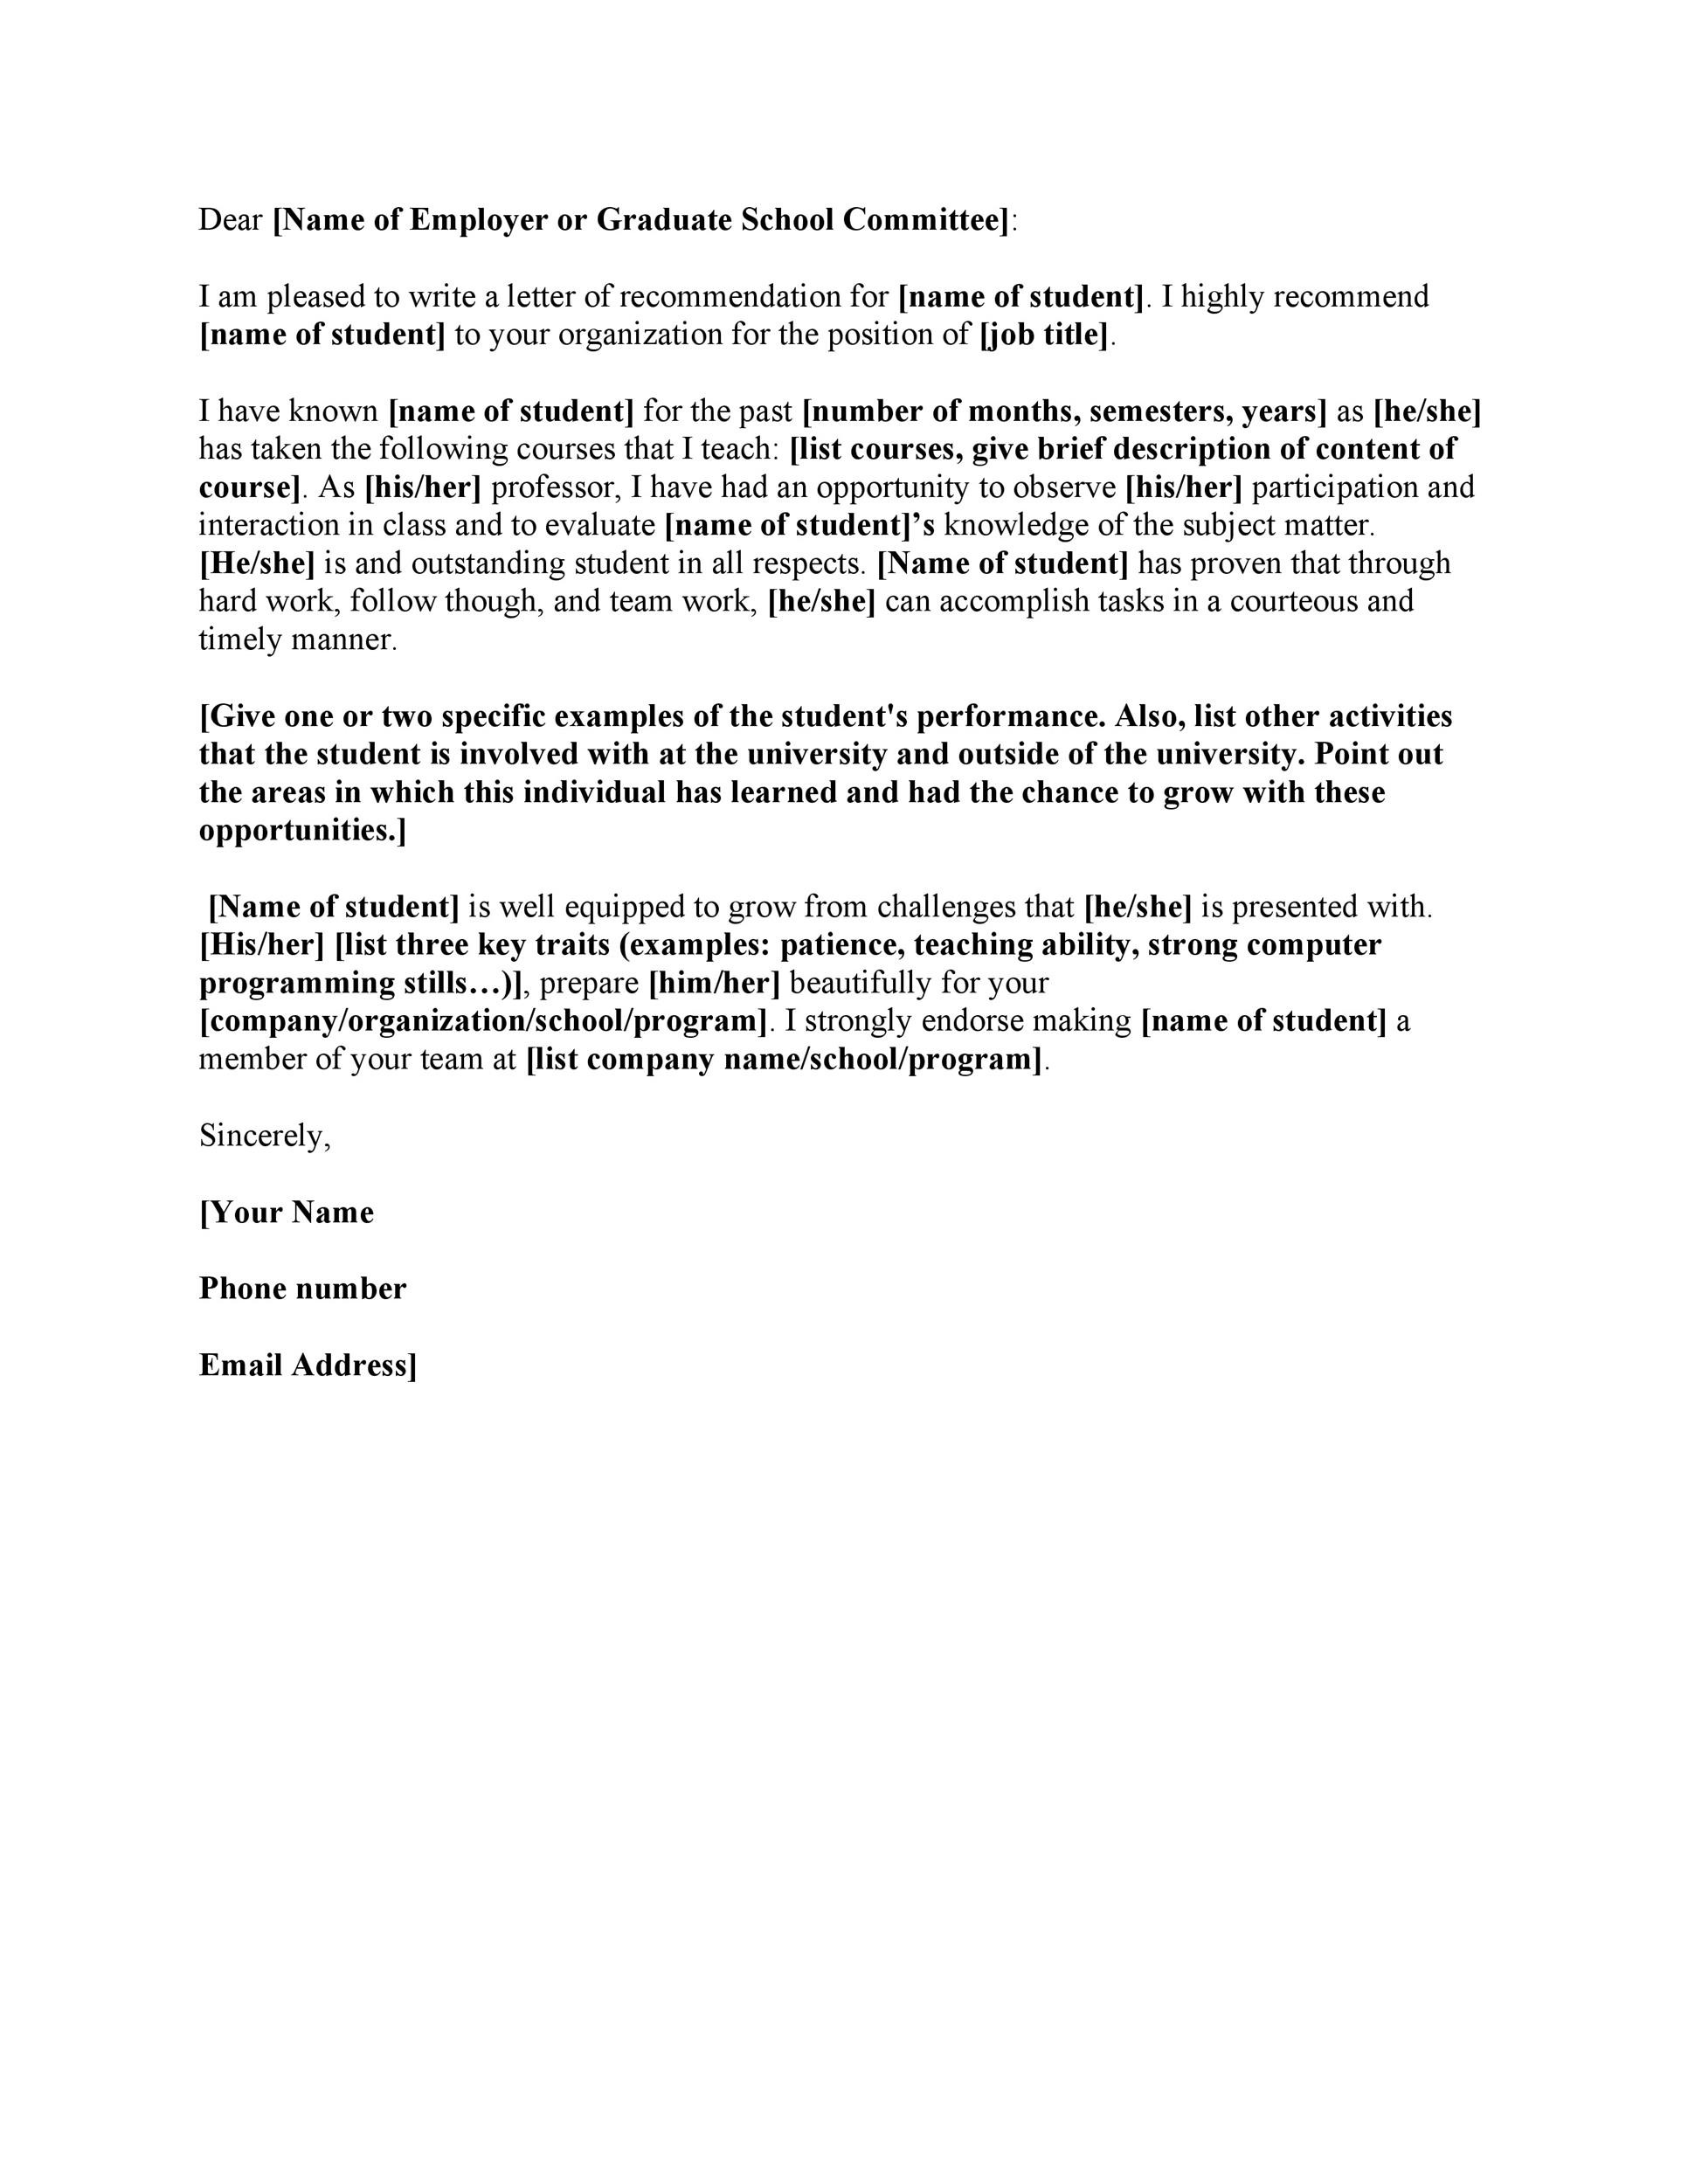 Phd Recommendation Letter From Employer from templatelab.com